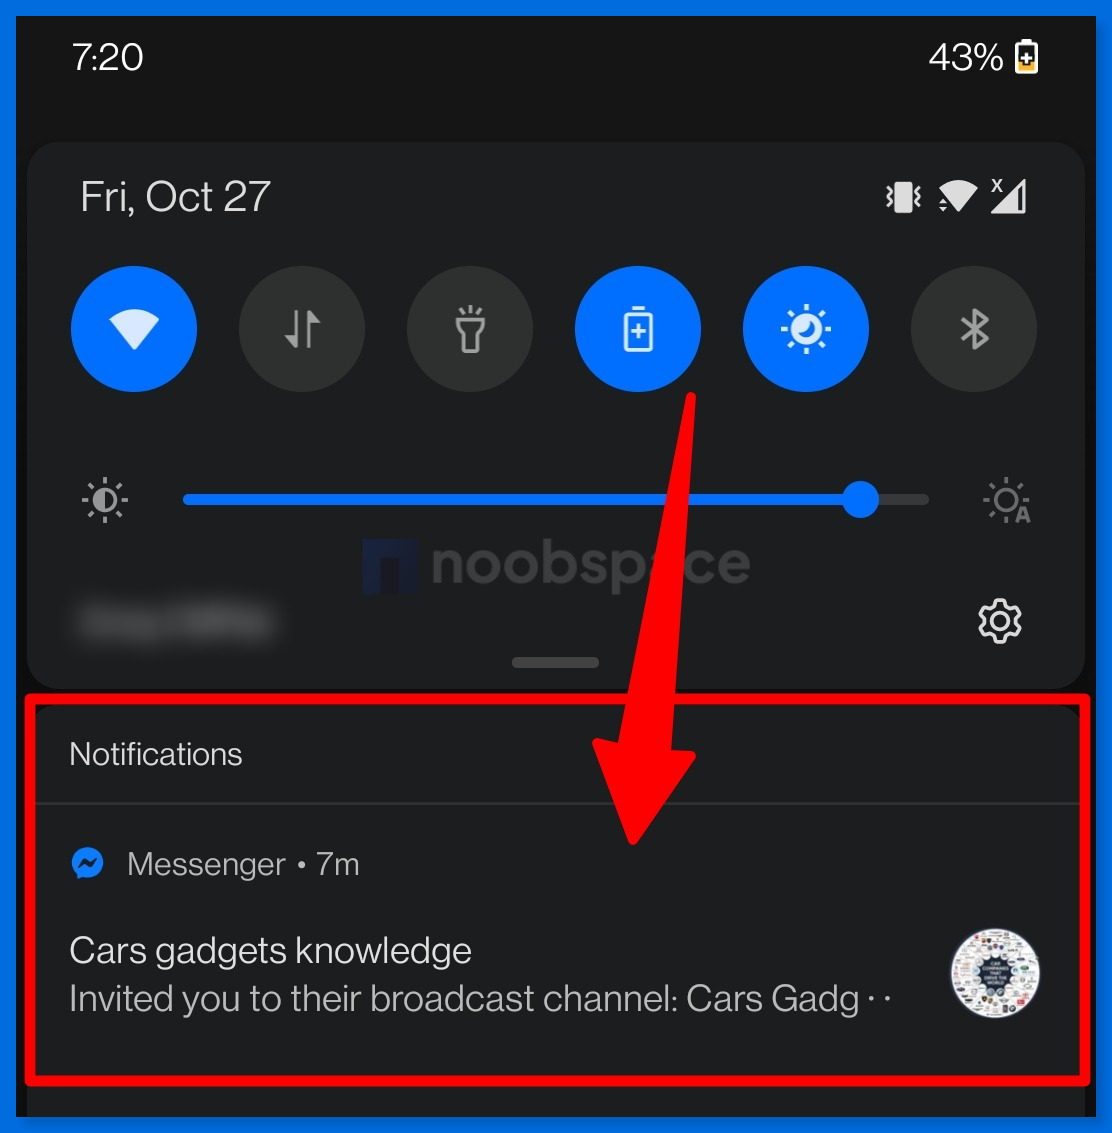 A screenshot of Android screen showing channel invite notification in Facebook Messenger